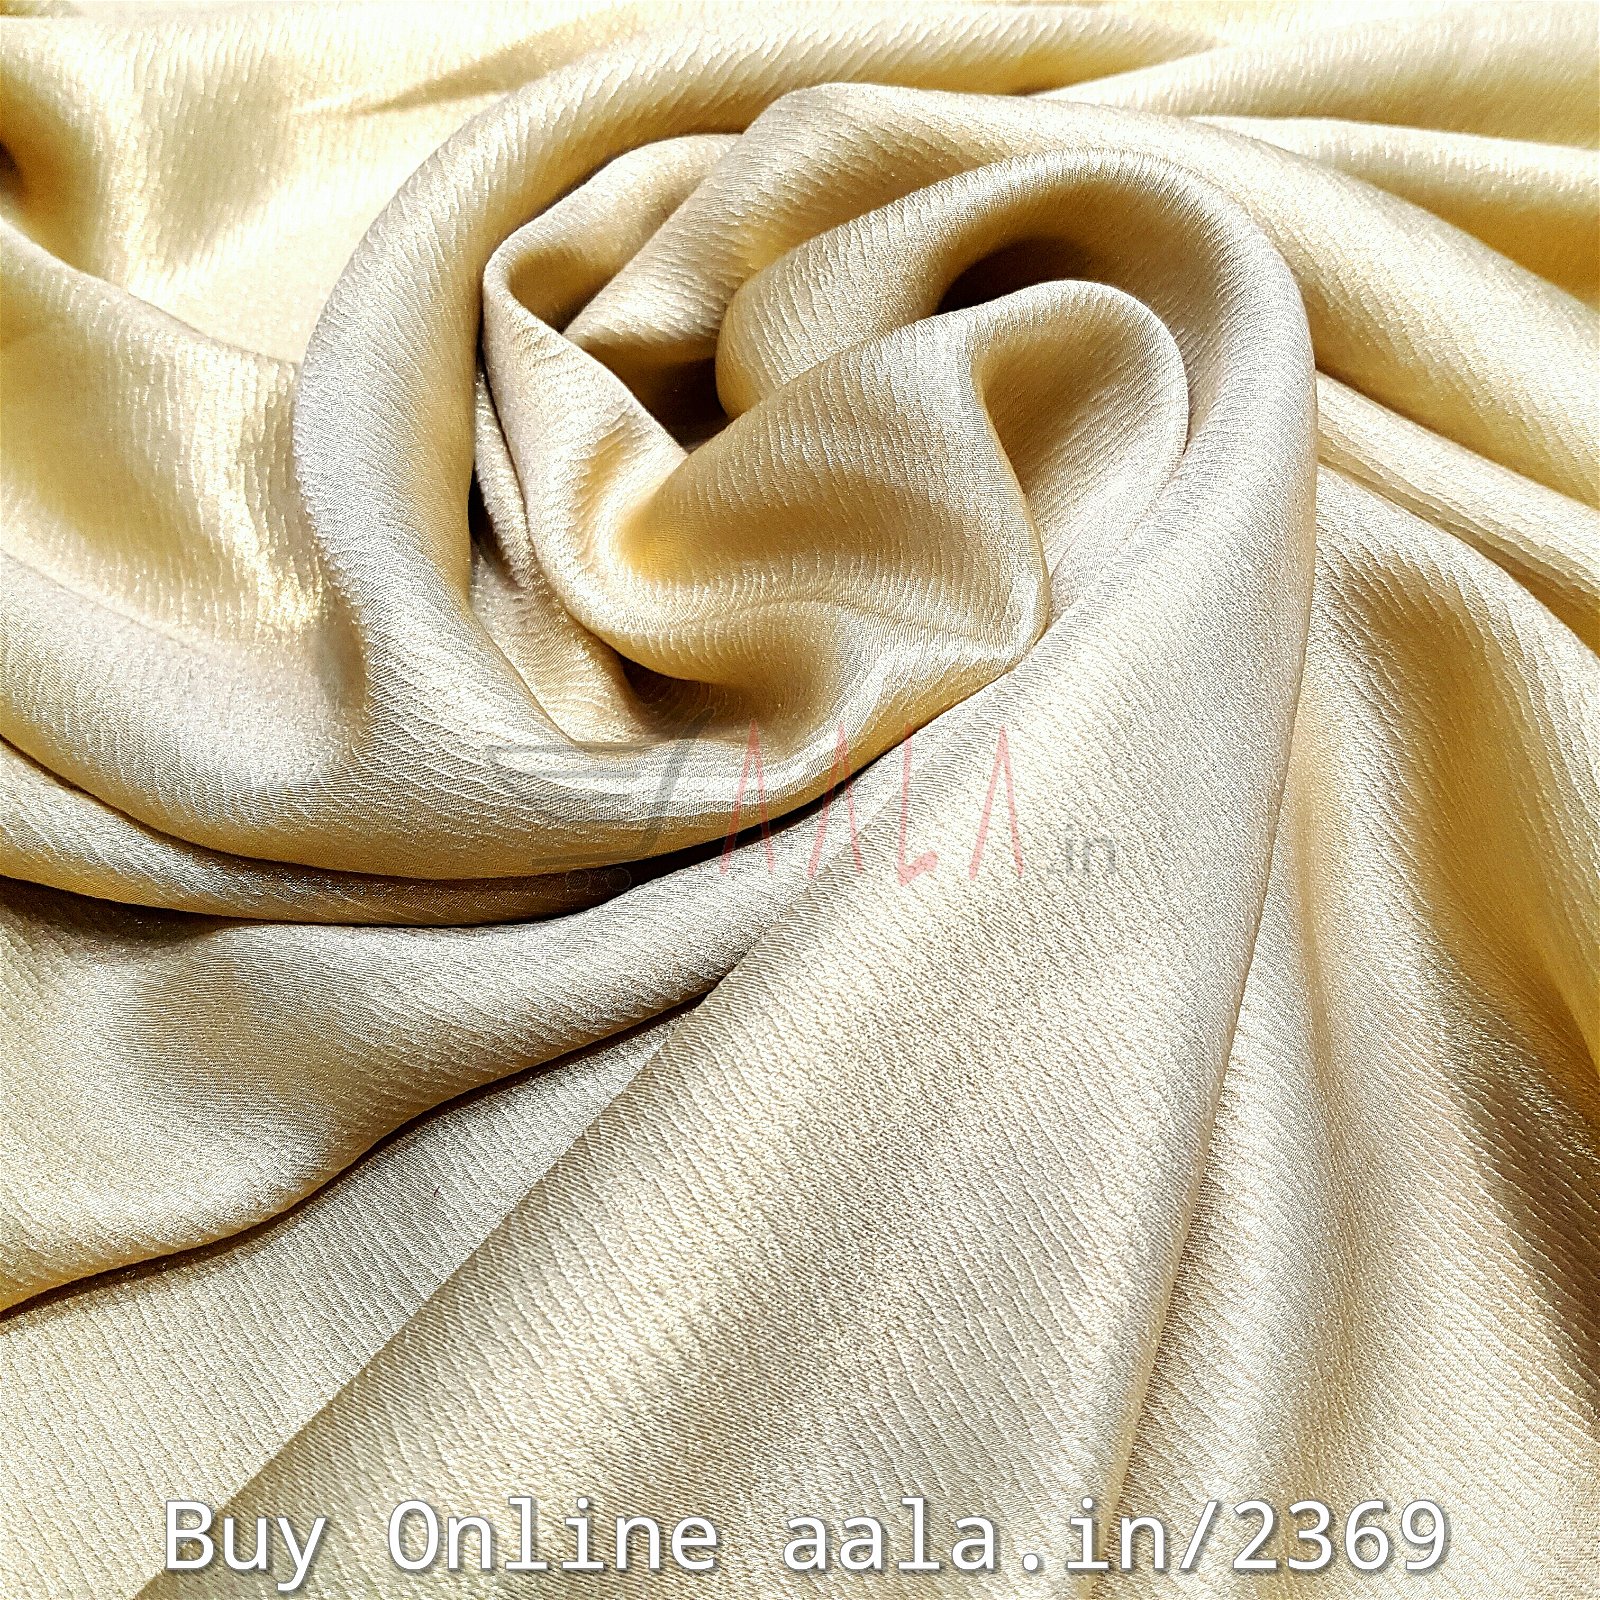 Foil Crush Satin Georgette Poly-ester 44 Inches Dyed Per Metre #2369